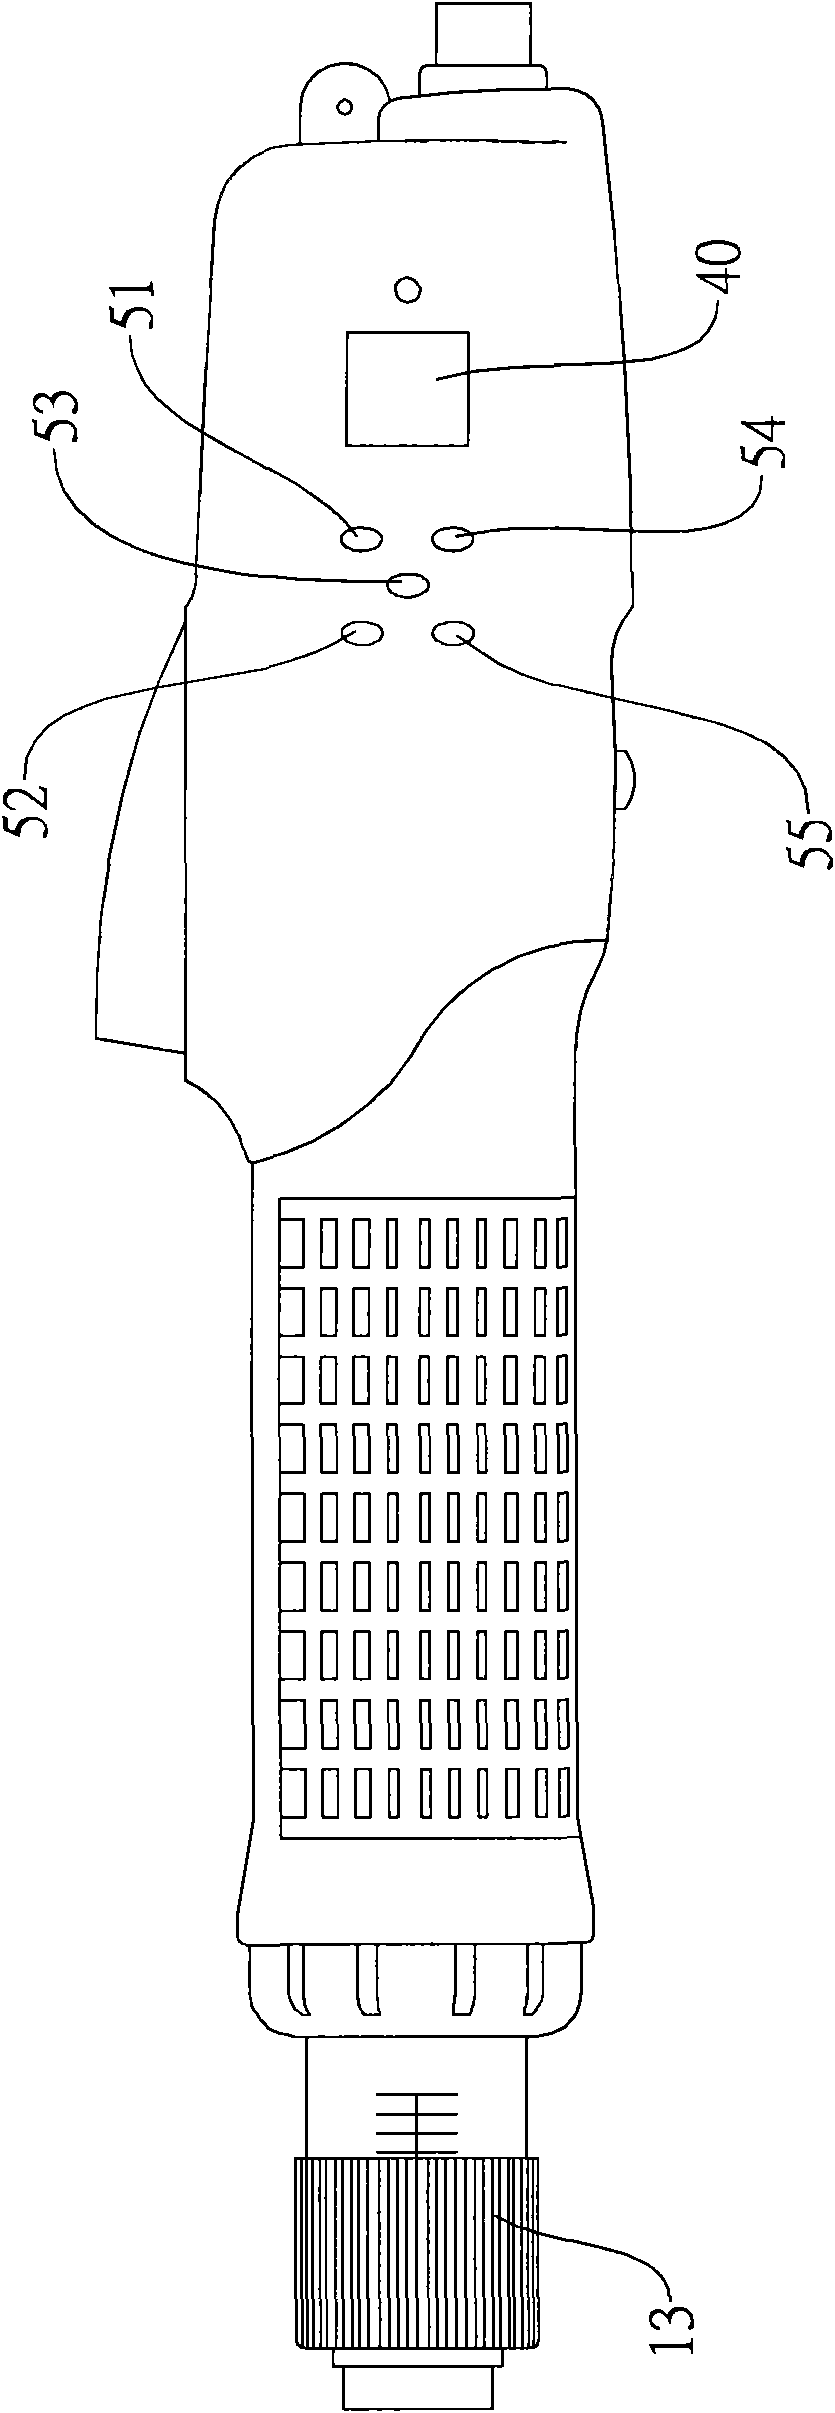 Electric screw driver capable of detecting correct locking of screw